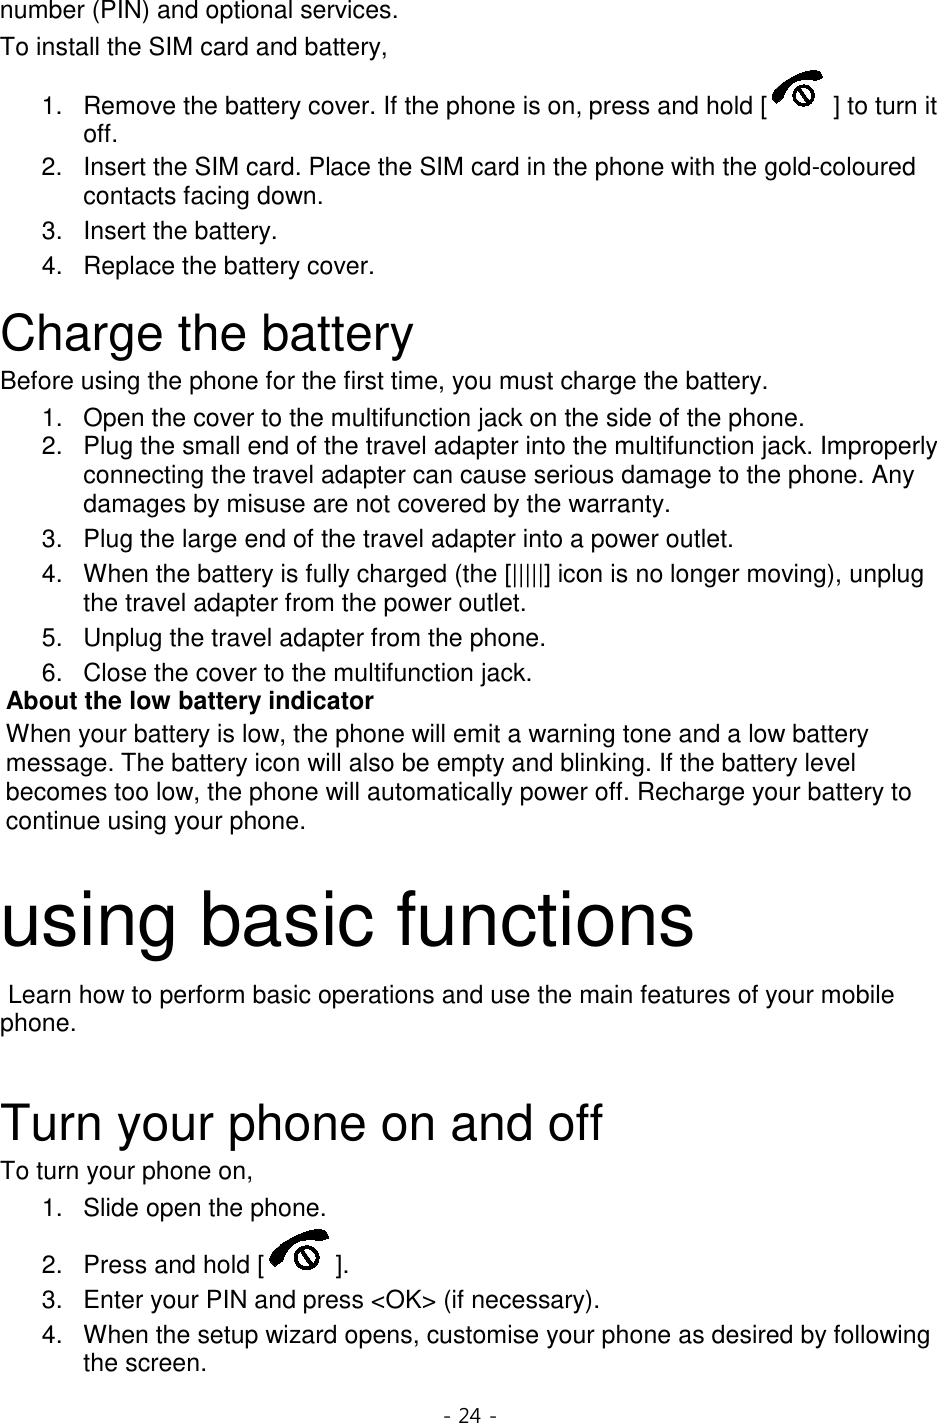 - 24 -  number (PIN) and optional services. To install the SIM card and battery, 1. Remove the battery cover. If the phone is on, press and hold [ ] to turn it off. 2. Insert the SIM card. Place the SIM card in the phone with the gold-coloured contacts facing down. 3. Insert the battery. 4. Replace the battery cover.  Charge the battery Before using the phone for the first time, you must charge the battery. 1. Open the cover to the multifunction jack on the side of the phone. 2. Plug the small end of the travel adapter into the multifunction jack. Improperly connecting the travel adapter can cause serious damage to the phone. Any damages by misuse are not covered by the warranty. 3. Plug the large end of the travel adapter into a power outlet. 4. When the battery is fully charged (the [|||||] icon is no longer moving), unplug the travel adapter from the power outlet. 5. Unplug the travel adapter from the phone. 6. Close the cover to the multifunction jack. About the low battery indicator When your battery is low, the phone will emit a warning tone and a low battery message. The battery icon will also be empty and blinking. If the battery level becomes too low, the phone will automatically power off. Recharge your battery to continue using your phone.  using basic functions  Learn how to perform basic operations and use the main features of your mobile phone.    Turn your phone on and off To turn your phone on, 1. Slide open the phone. 2. Press and hold [ ]. 3. Enter your PIN and press &lt;OK&gt; (if necessary). 4.  When the setup wizard opens, customise your phone as desired by following the screen. 